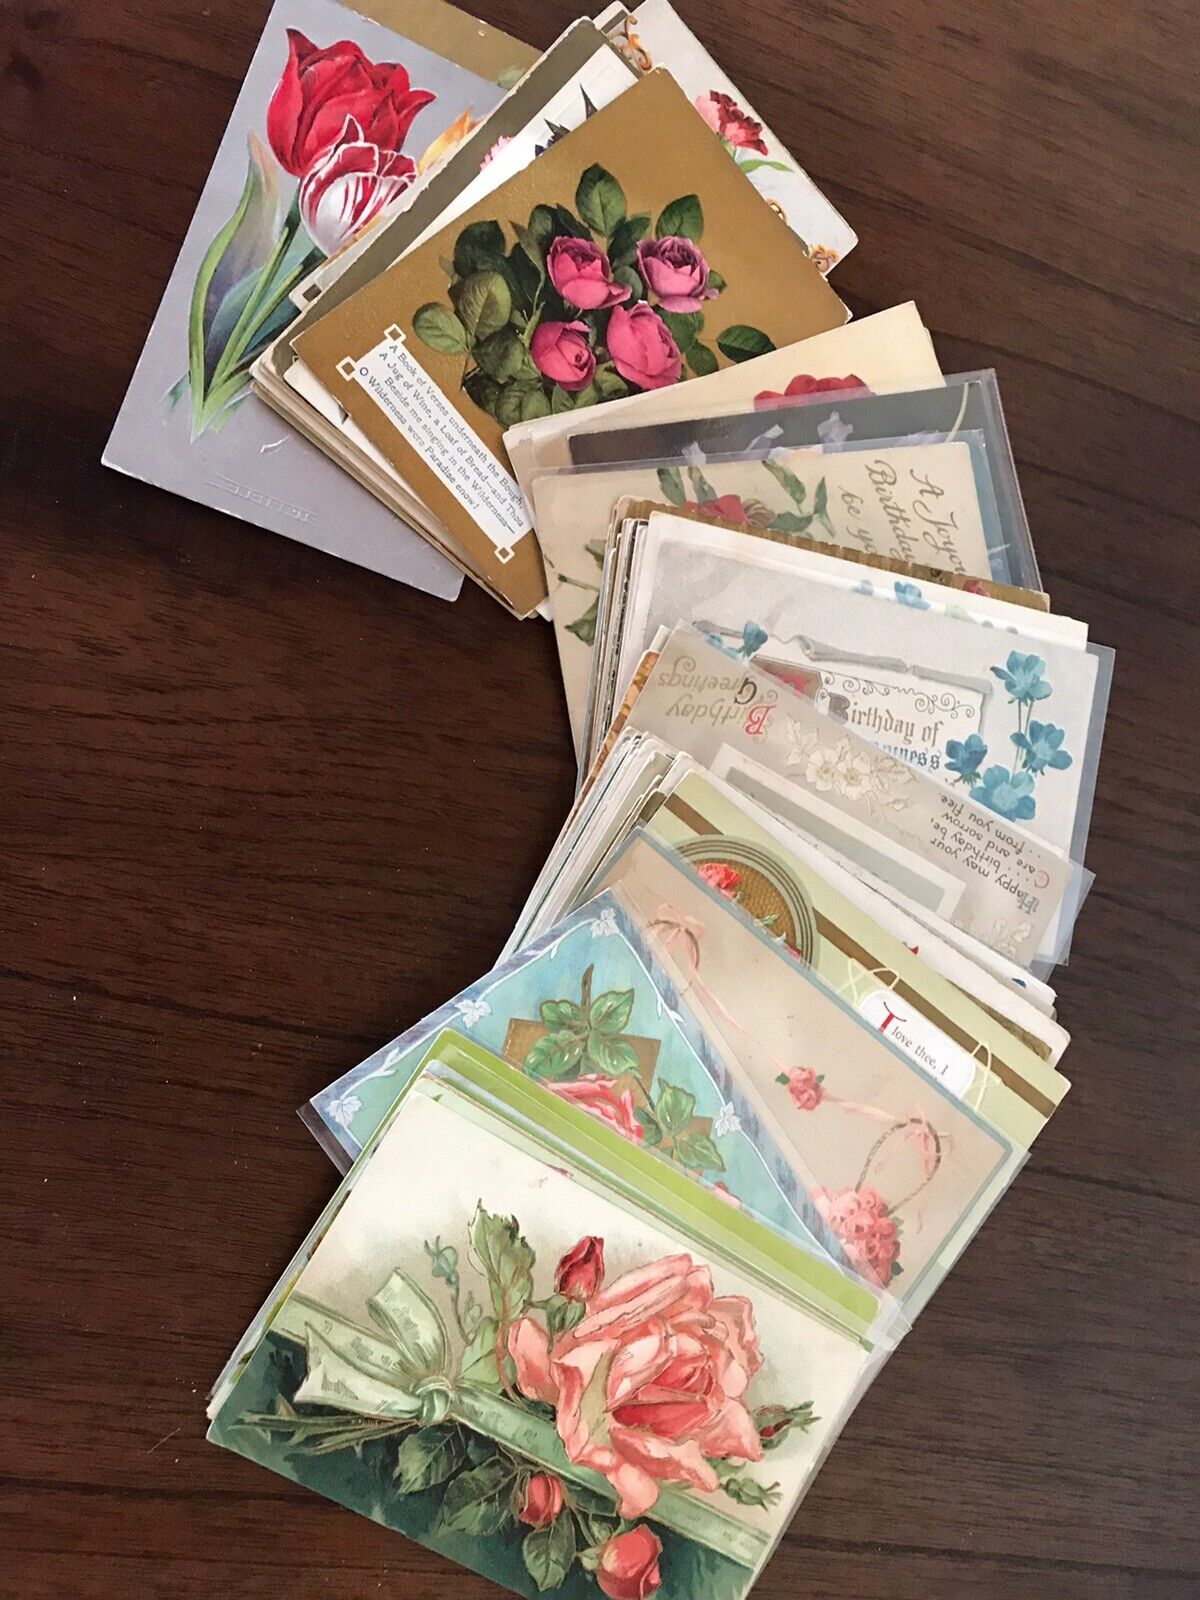 Lot of 25 Vintage 1900’s Greetings Postcards ~Antique-In Sleeves~Free Shipping! Без бренда - фотография #5